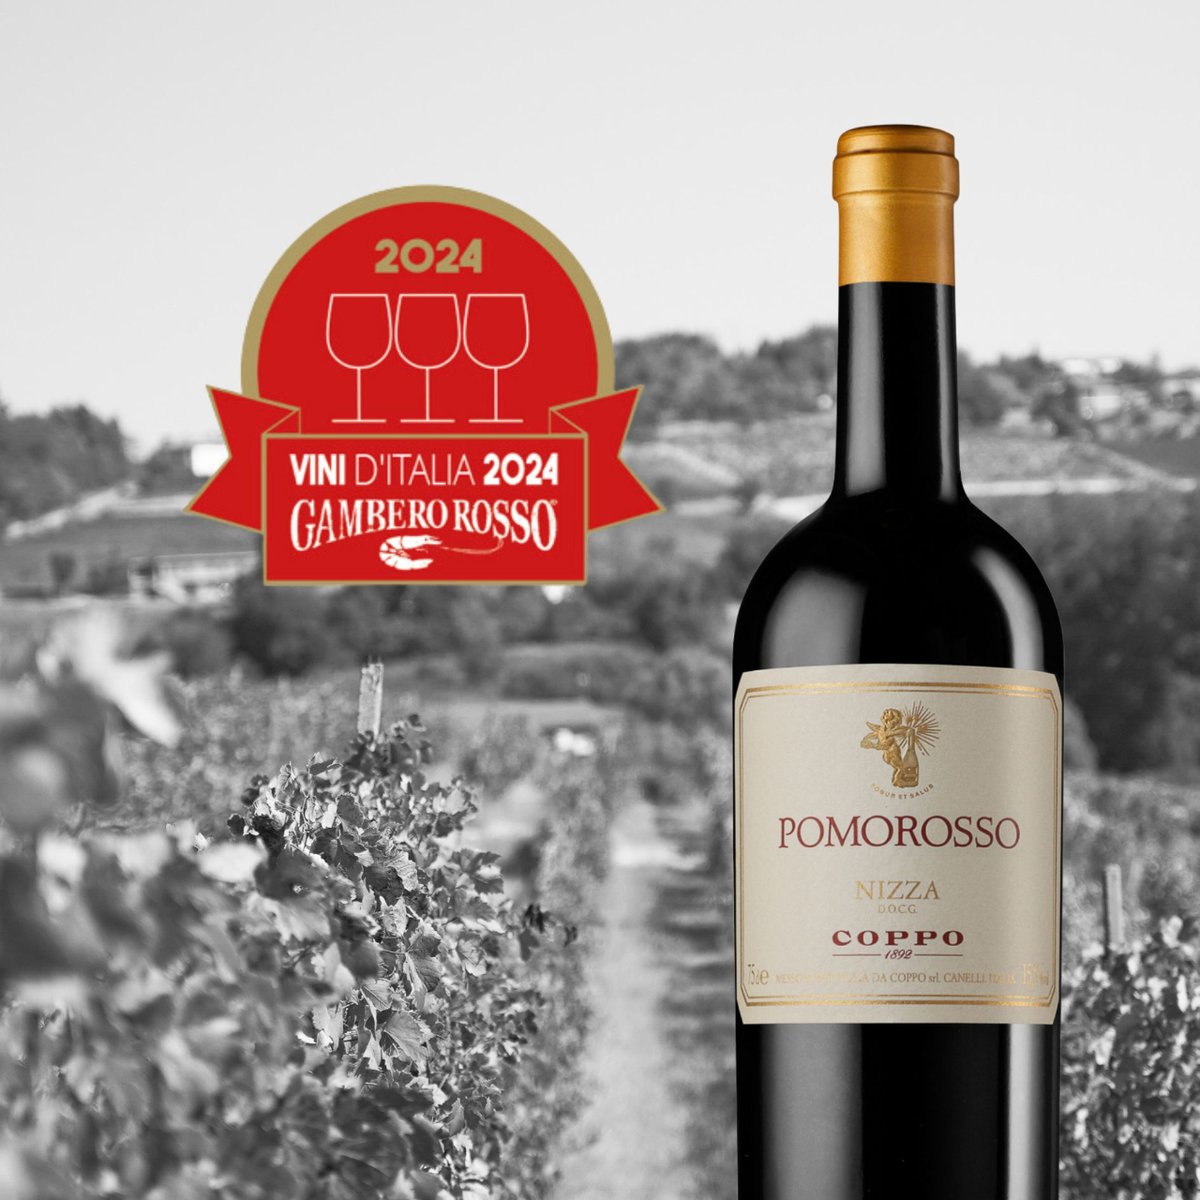 14 times! #trebicchieri 🙏 @gamberorossointernational 
👉  Pomorosso 2020 was recently awarded the Tre Bicchieri Prize by Gambero Rosso 

See more 👉coppo.it/en/wines/barbe…